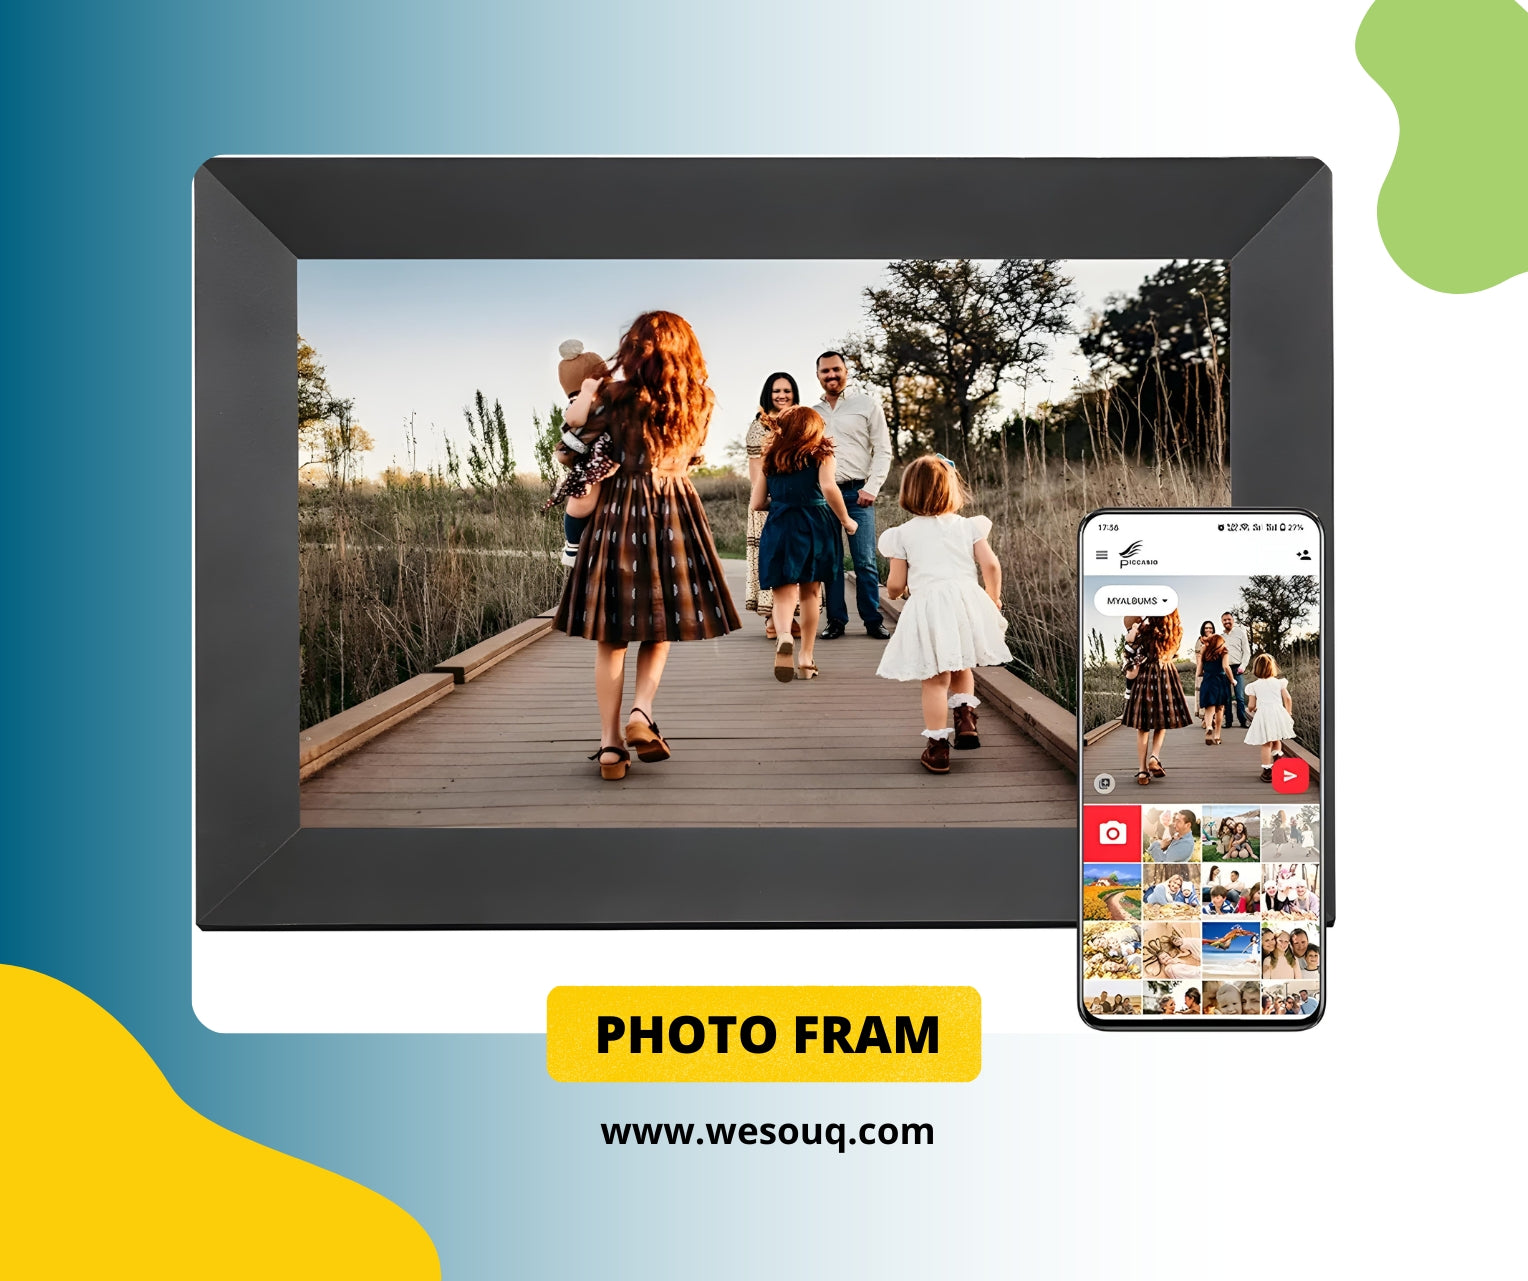 64GB, 32GB, 16GB, Smart WiFi Digital Photo Frame with 10.1 inch IPS Touch Screen, Perfect for Displaying